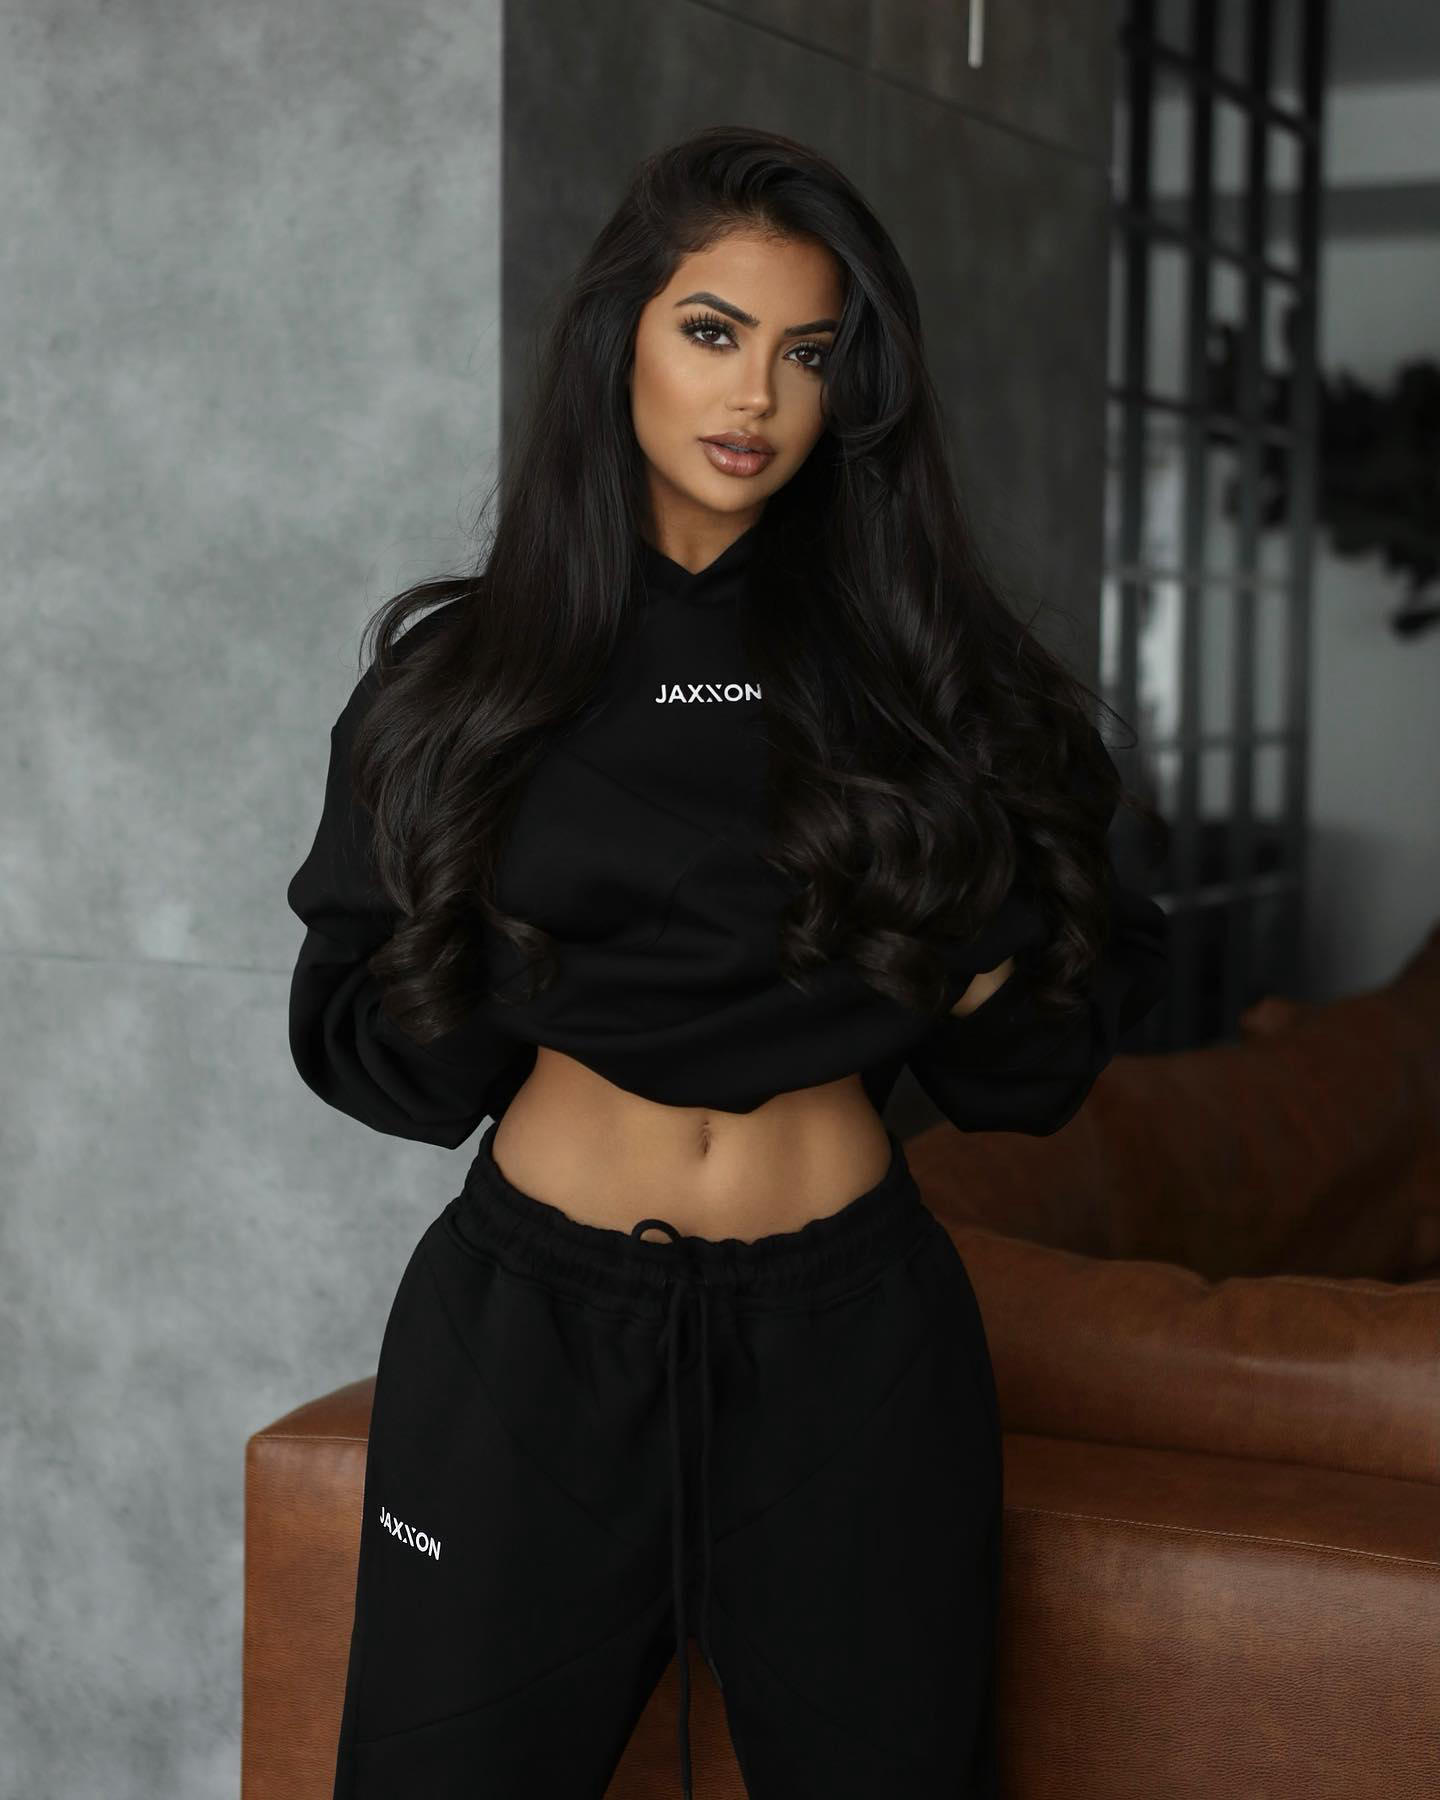 Living in comfy oversized sets all holiday long #jaxxon